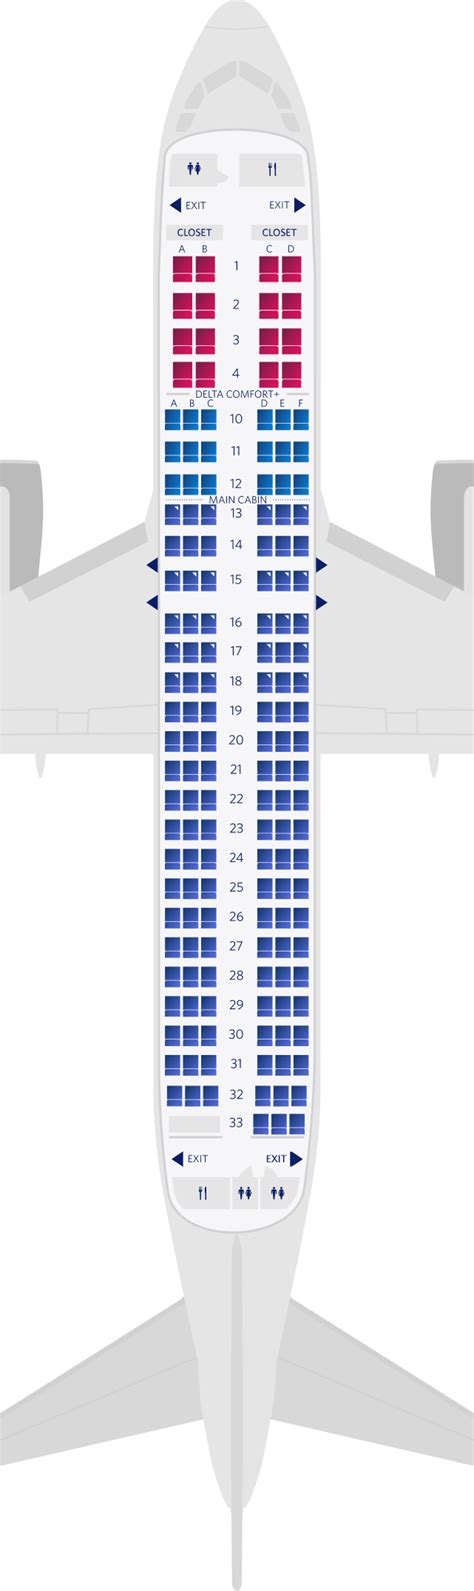 Airbus A320 Aircraft Seat Maps Specs Amenities